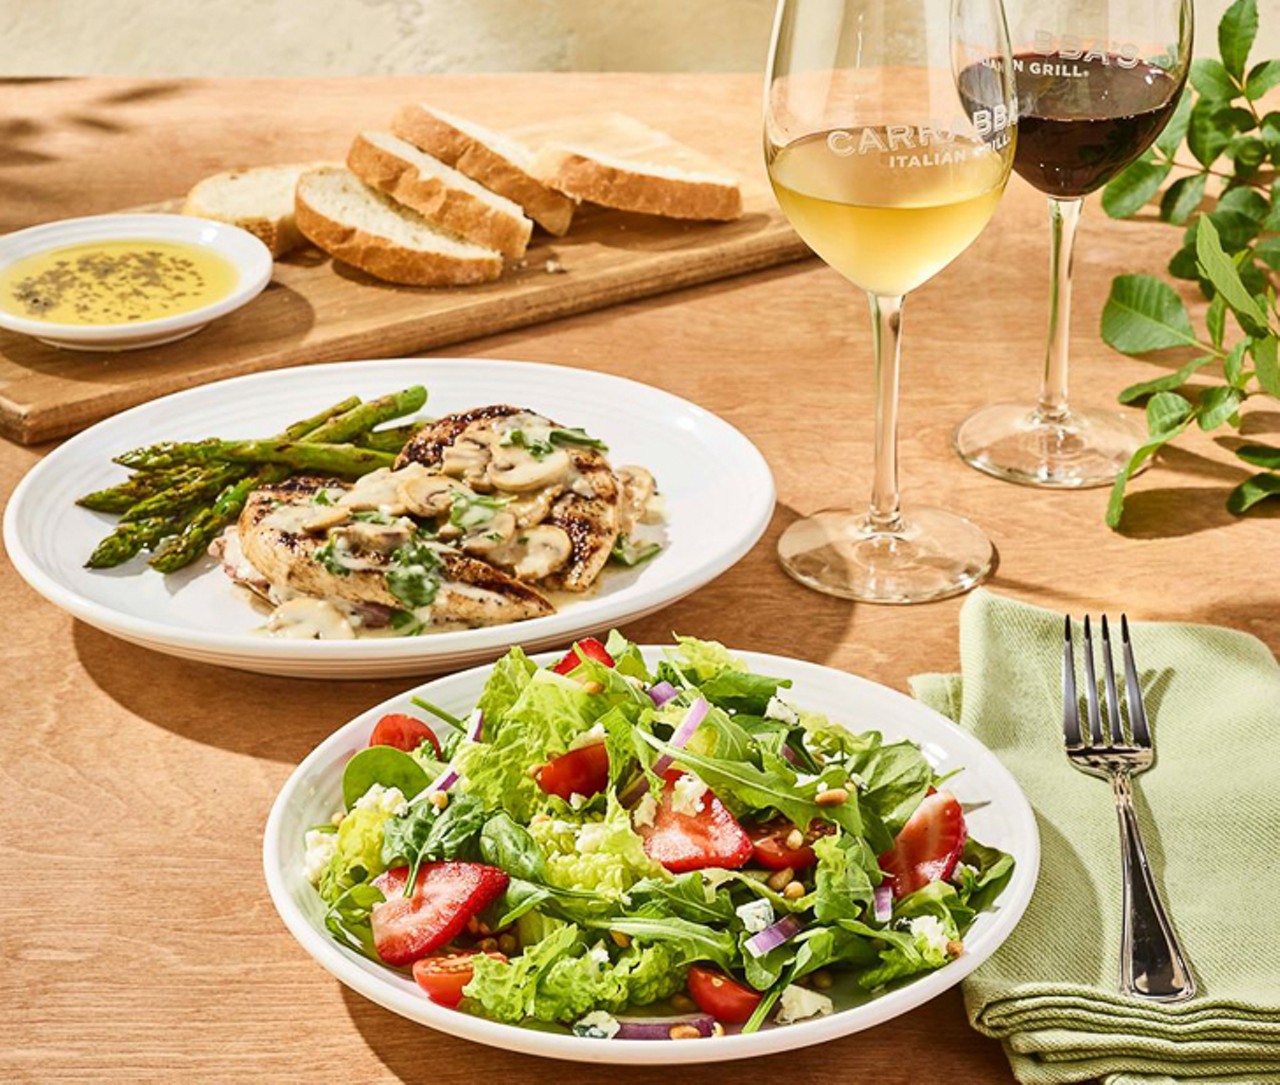 Carrabba&#146;s Italian Grill
Multiple locations. https://www.carrabbas.com/  
Pick up your favorite signature dishes such as Chicken Bryan, Pollo Rosa Maria and Chicken Marsala from your local Carrabba&#146;s Italian Grill or get your dinner delivered right to your door. Order online at carrabbas.com. Use code &#145;SPRING15&#146; to receive 15% off your order or for Free Delivery, use code &#145;SPRINGFREE.&#146;
Photo via Carrabba&#146;s/Facebook